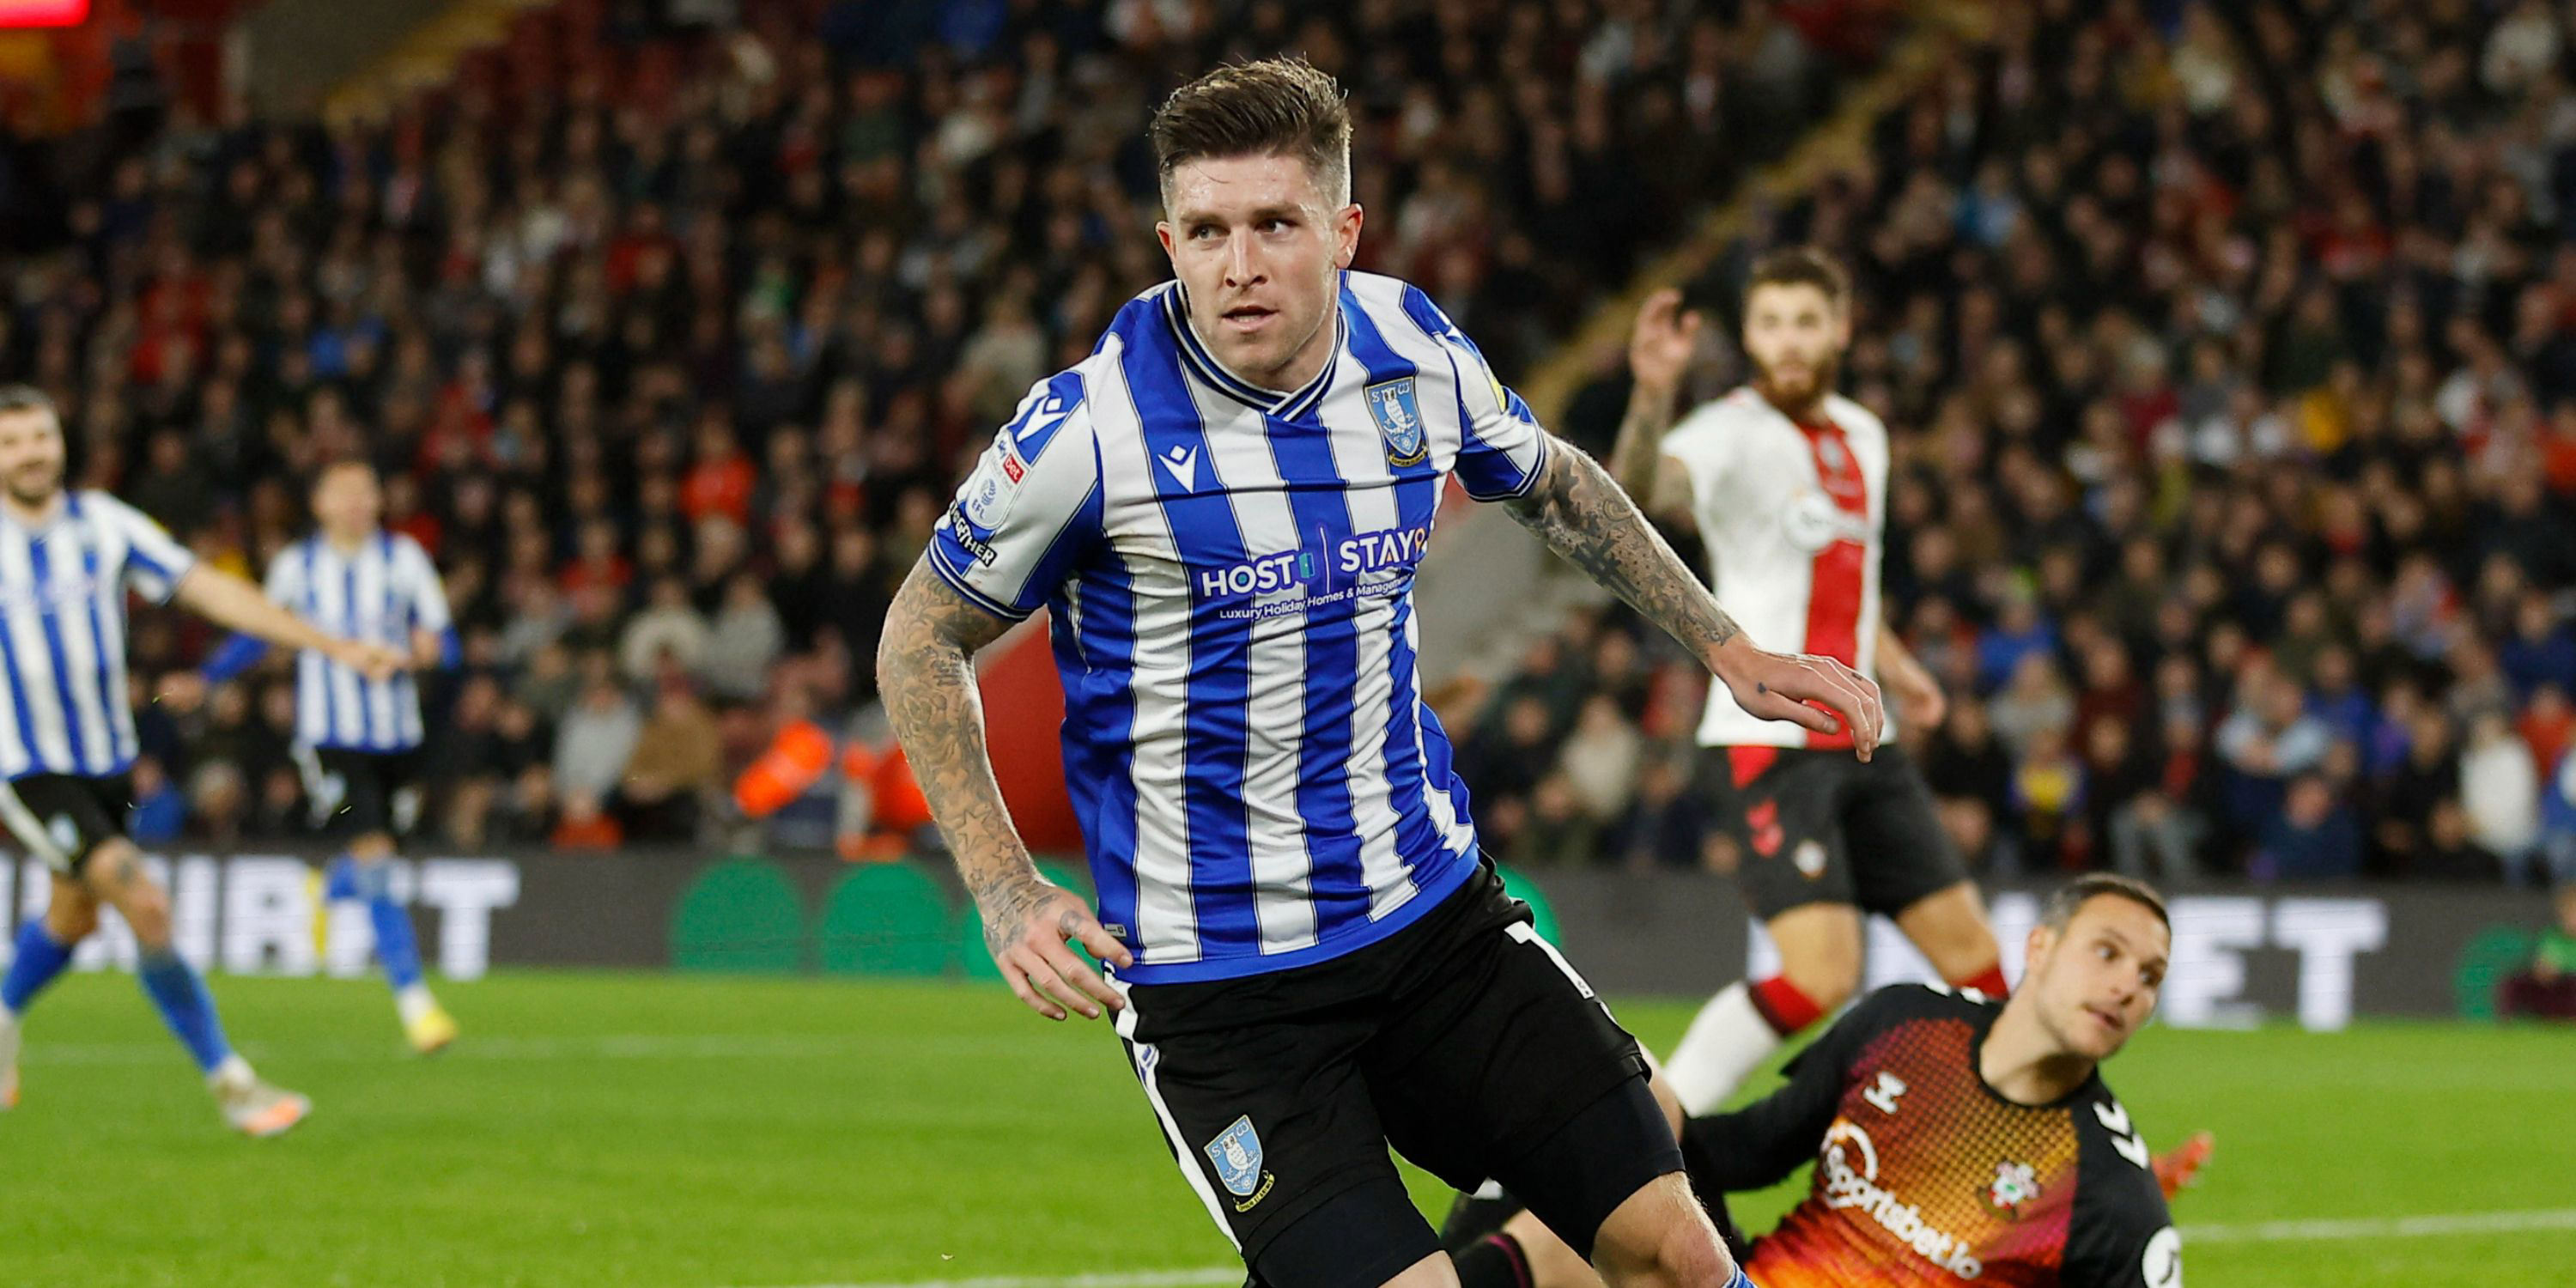 Sheffield Wednesday could sign exciting Windass replacement